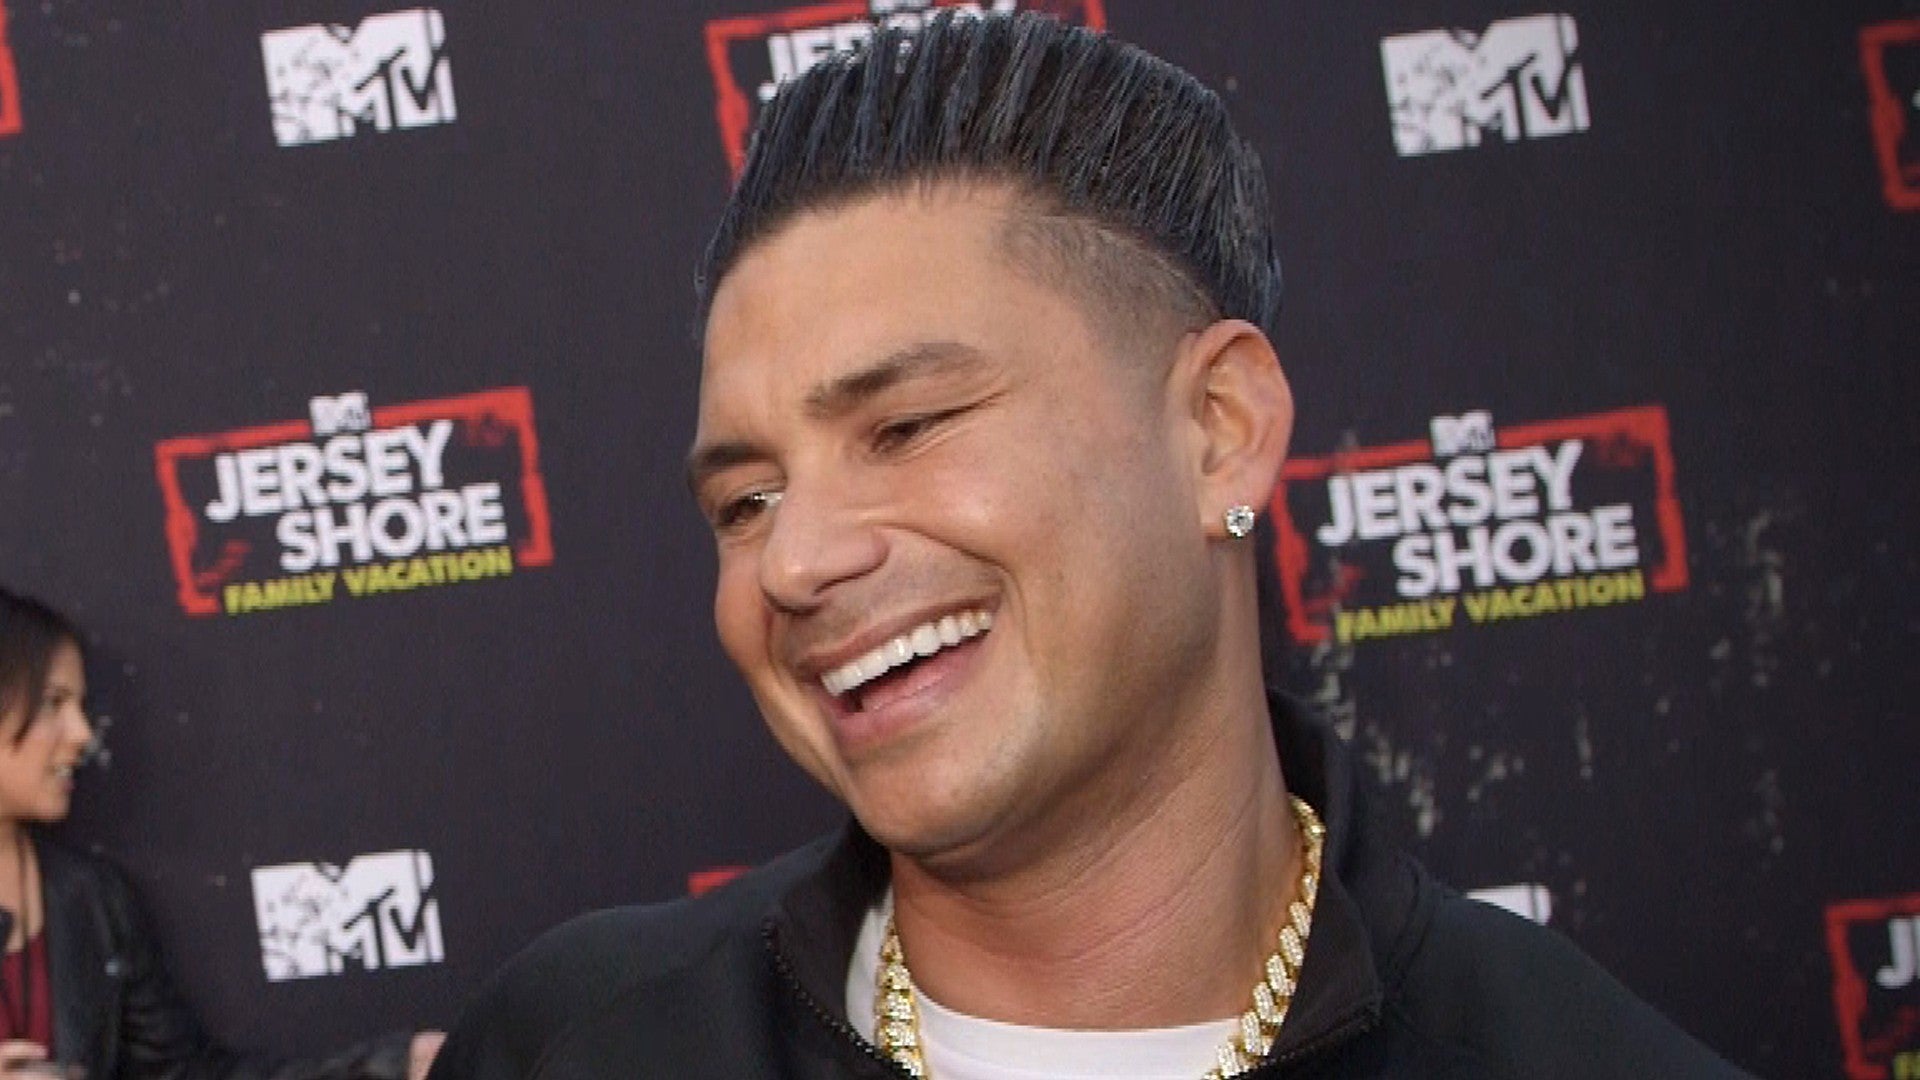 Jersey Shore' Star Pauly D Says 